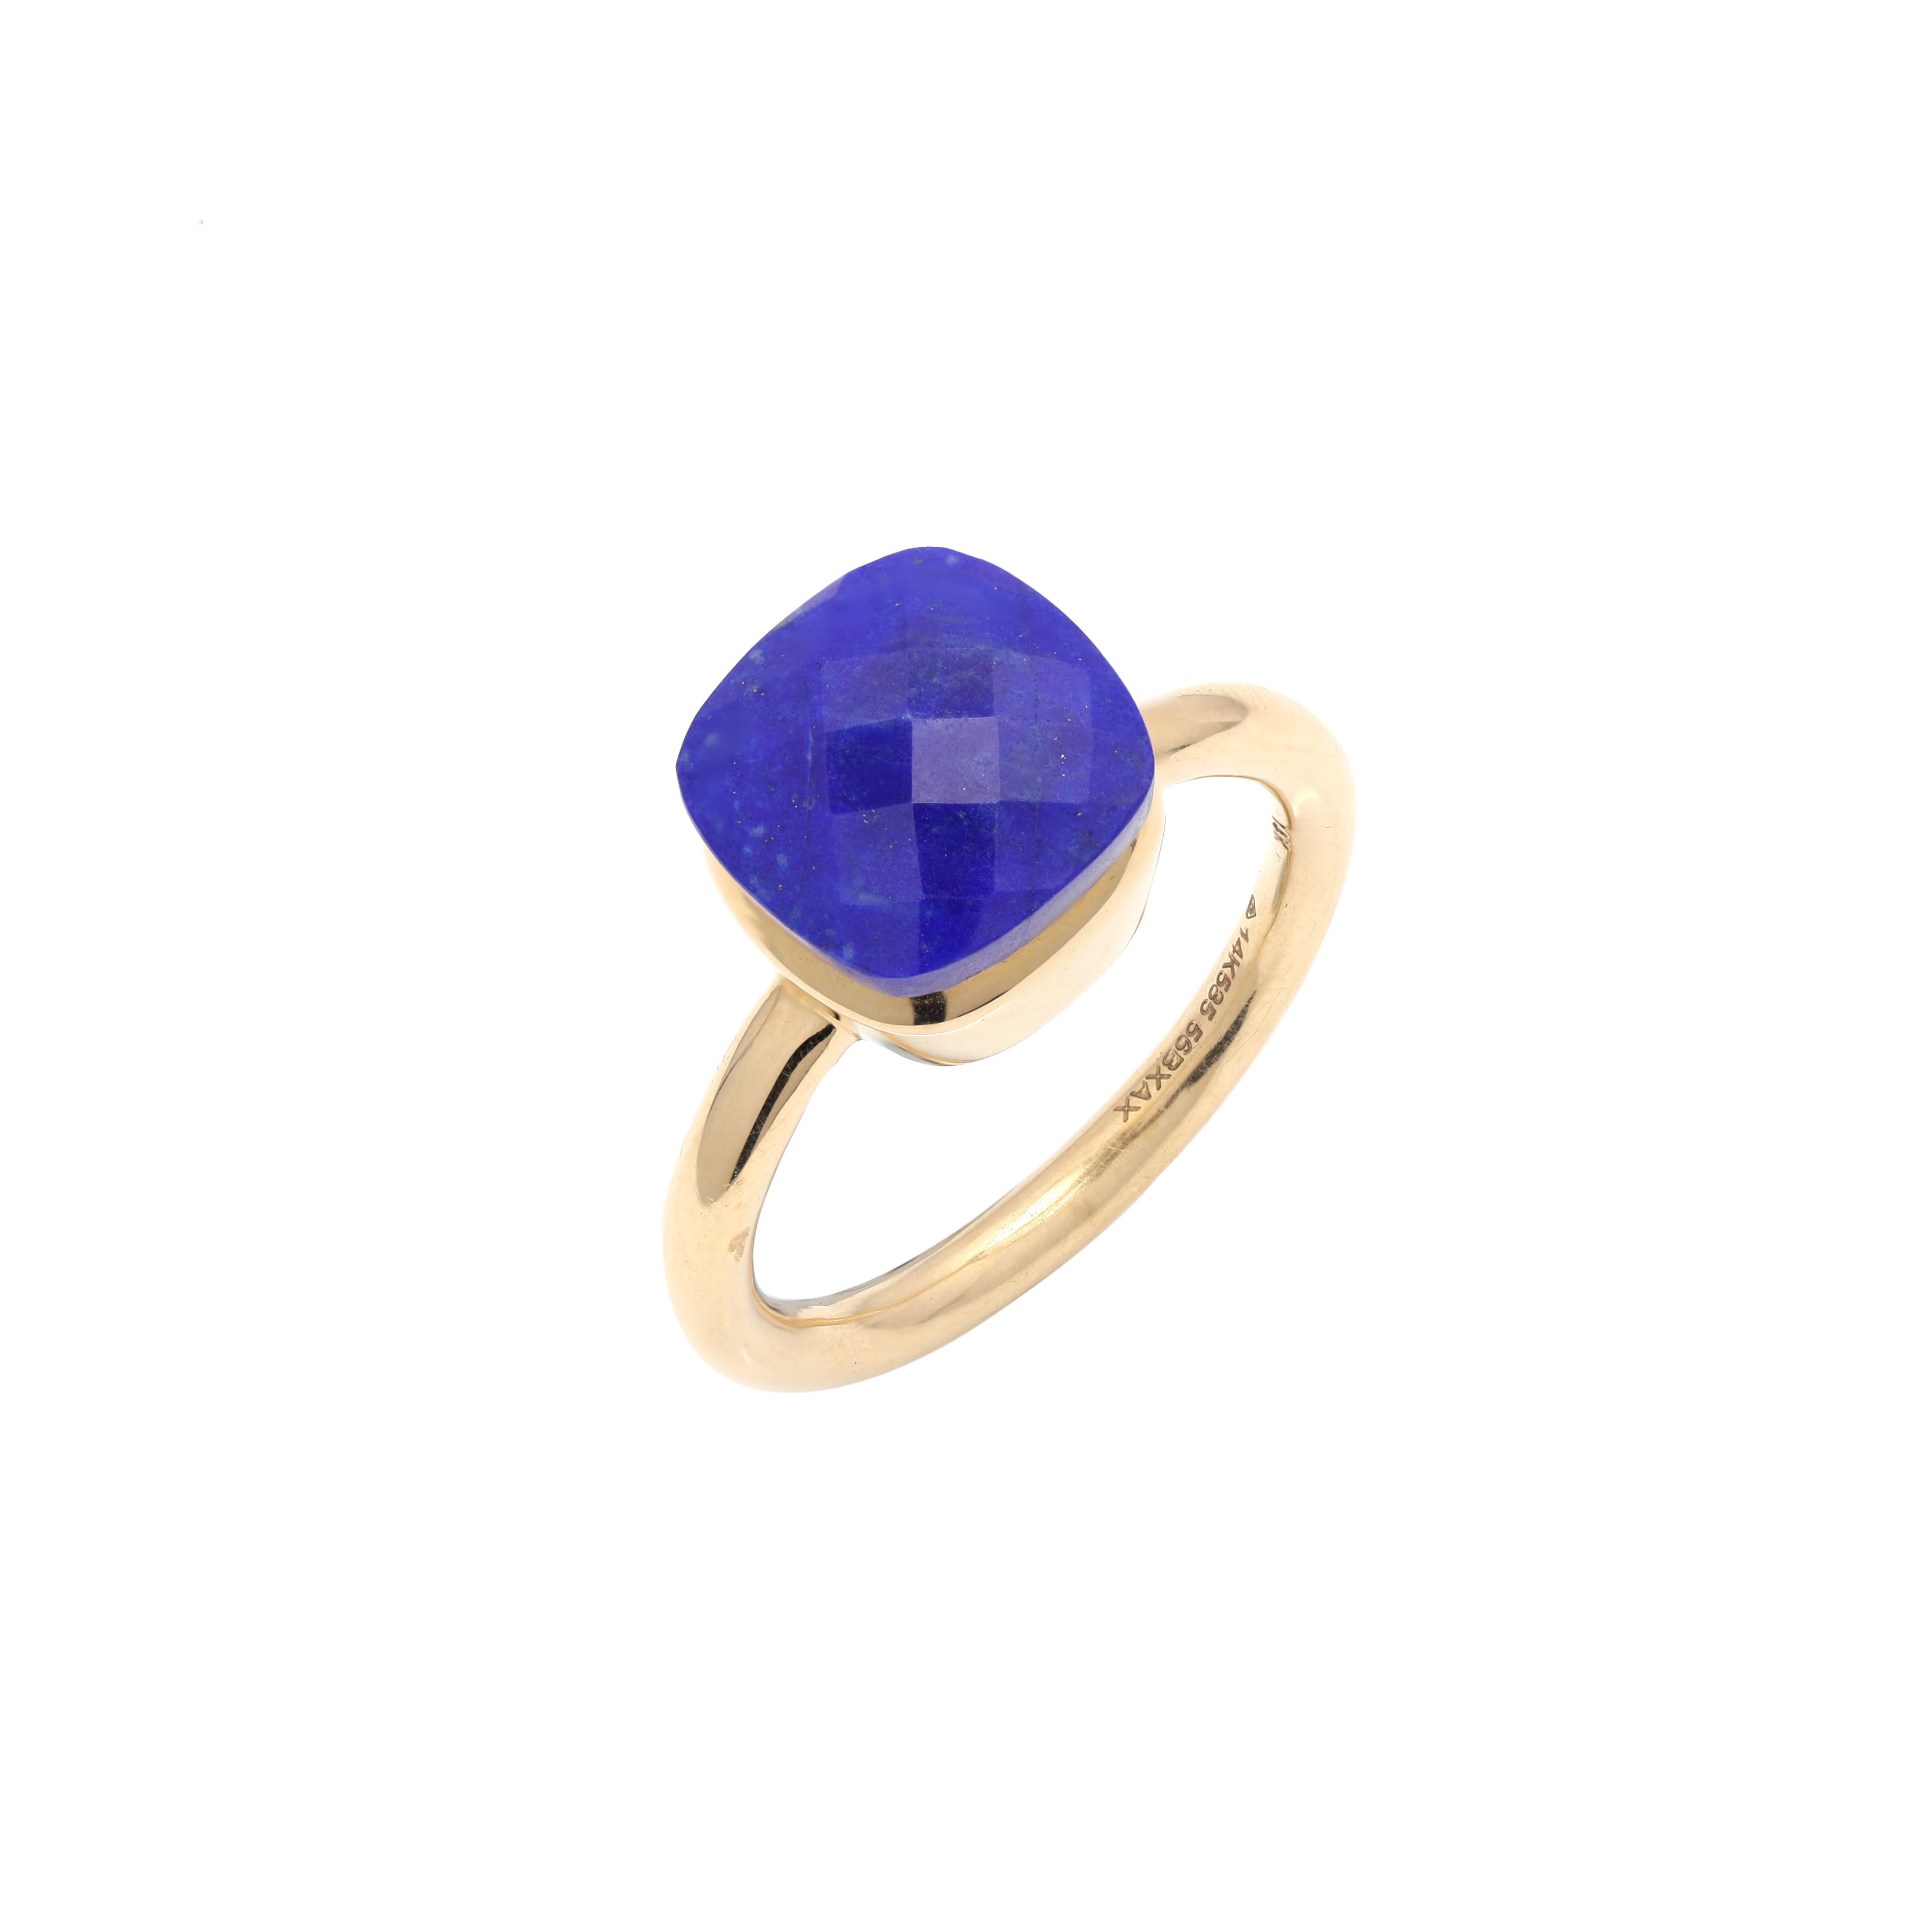 For Sale:  6.9 Carat Cushion Lapis Lazuli Ring in 14k Solid Yellow Gold Mens Jewelry 3